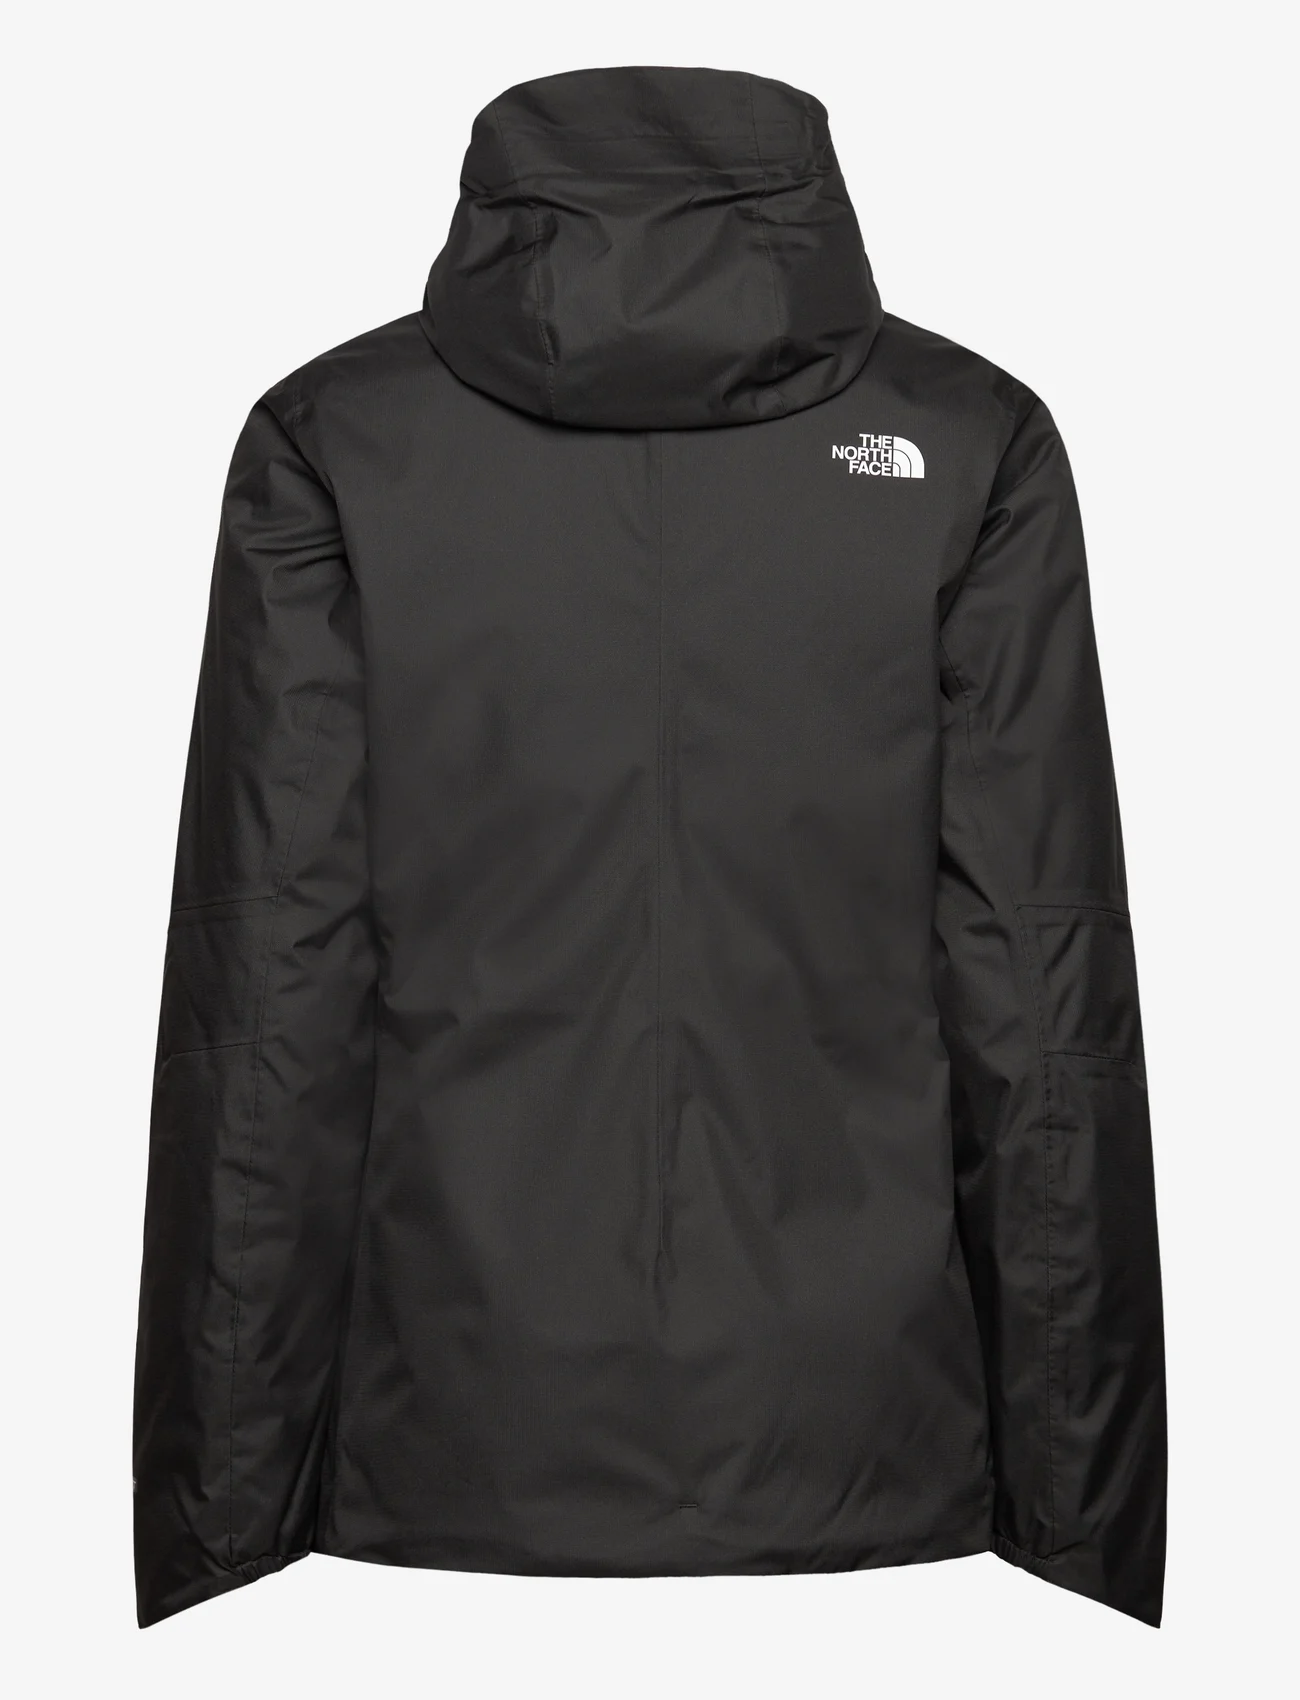 The North Face - W QUEST INSULATED JACKET - EU - outdoor & rain jackets - tnf black - 1